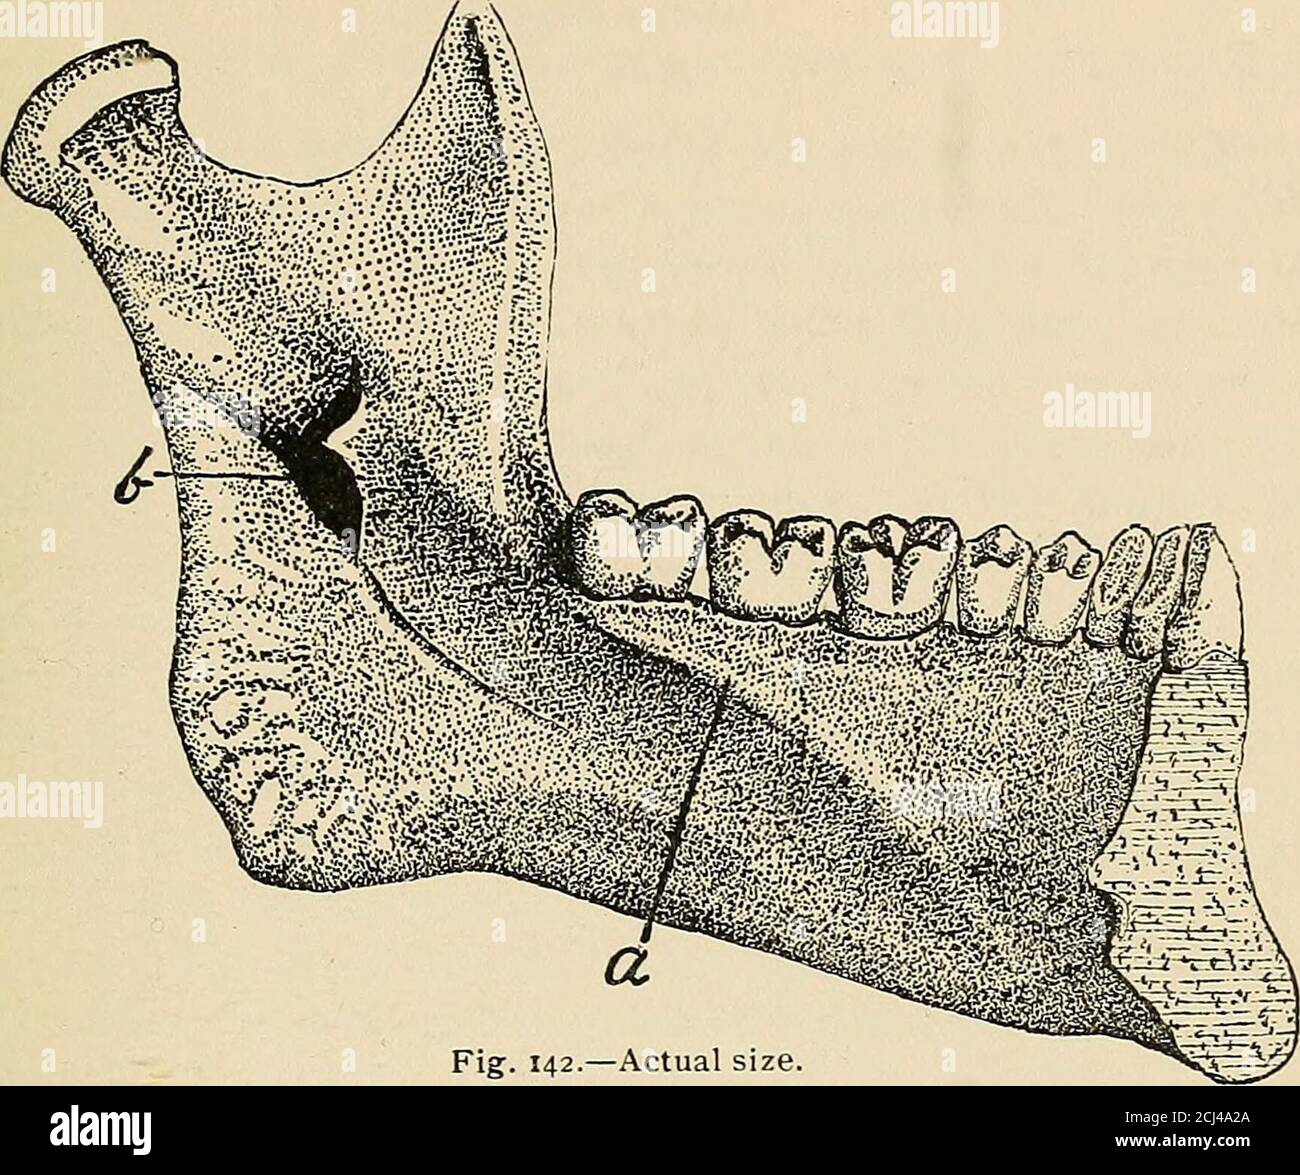 . Descriptive anatomy of the human teeth . eth, constituting the condition known astongue-tied. This is generally corrected by the muscularefforts of the tongue, which stretch the membrane sufficientlyto accommodate its motions. 210. On the lingual side, in the upper jaw, the gums(Fig. 127) are usually of greater extent and thicker. Theycover the entire roof of the mouth, to the conjunction of thehard and soft palate, as a hard dense layer. In the anteriorportion, a series of irregular ridges, known as the rugae, radi-ate from the median line toward both sides, stopping short ofthe gingivae. I Stock Photo